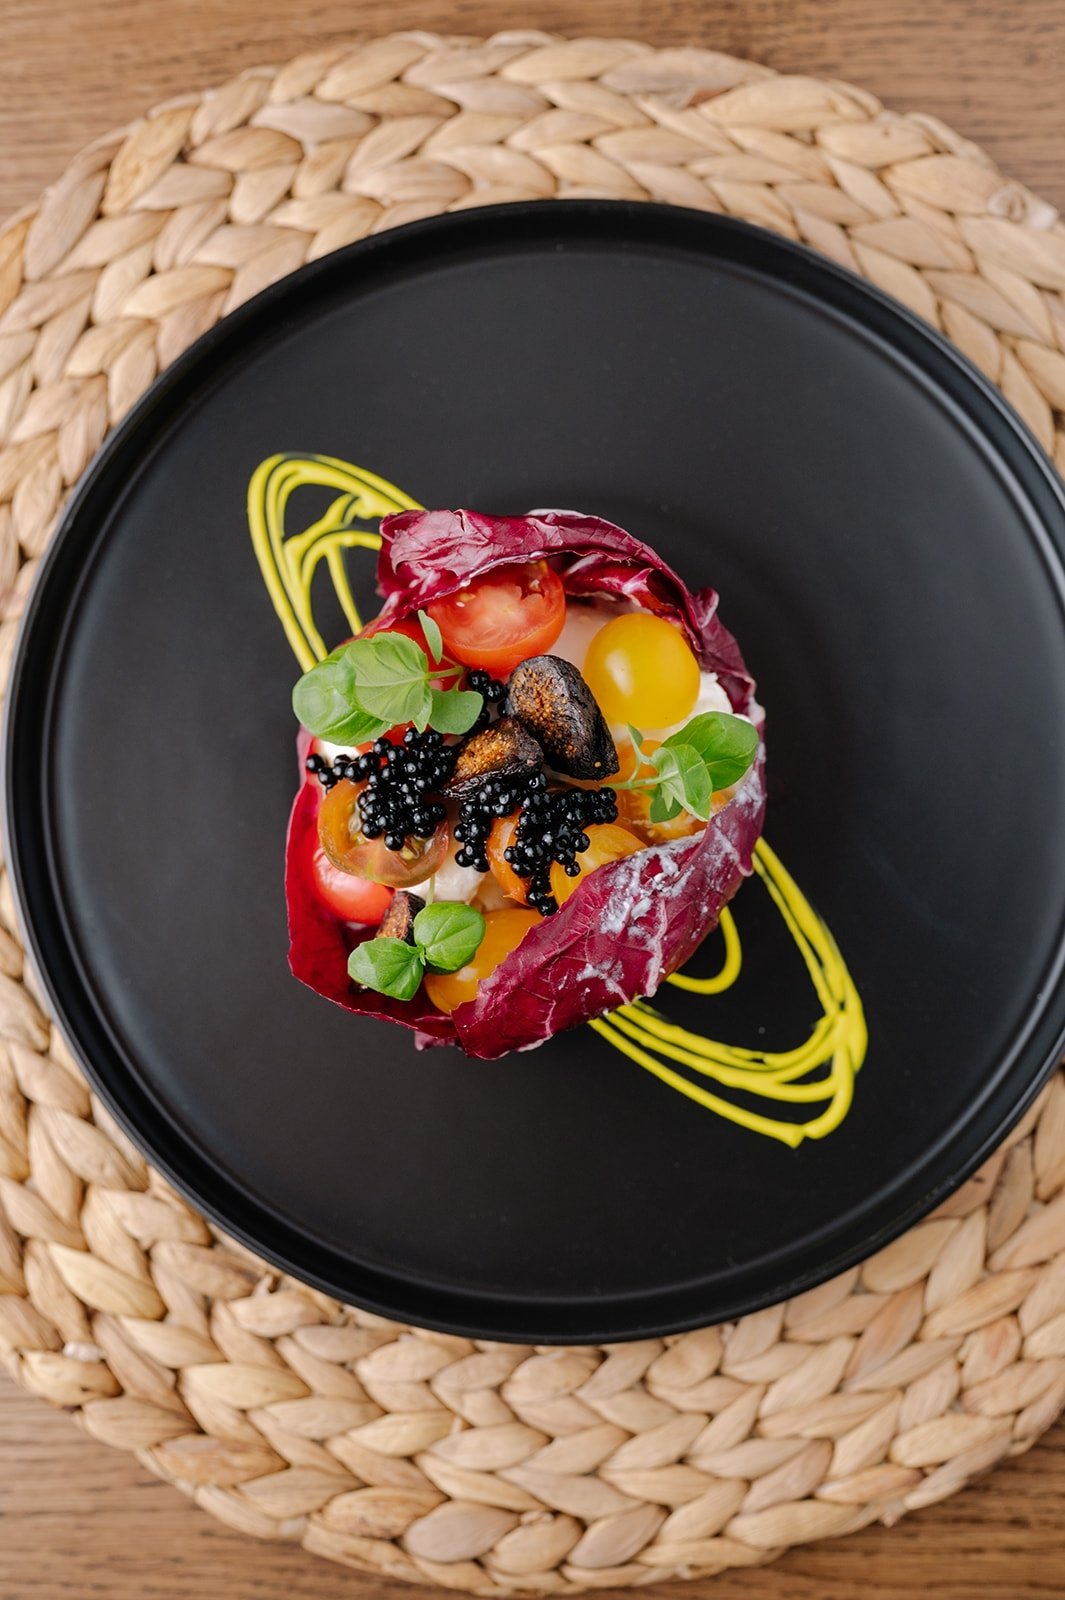 Our Burrata &amp; Heirloom Tomato Salad is one of our most popular plated salads, not just because it is next level delicious but it is oh so gorgeous!

basil oil + crema, heirloom tomato, aged balsamic, grilled radicchio